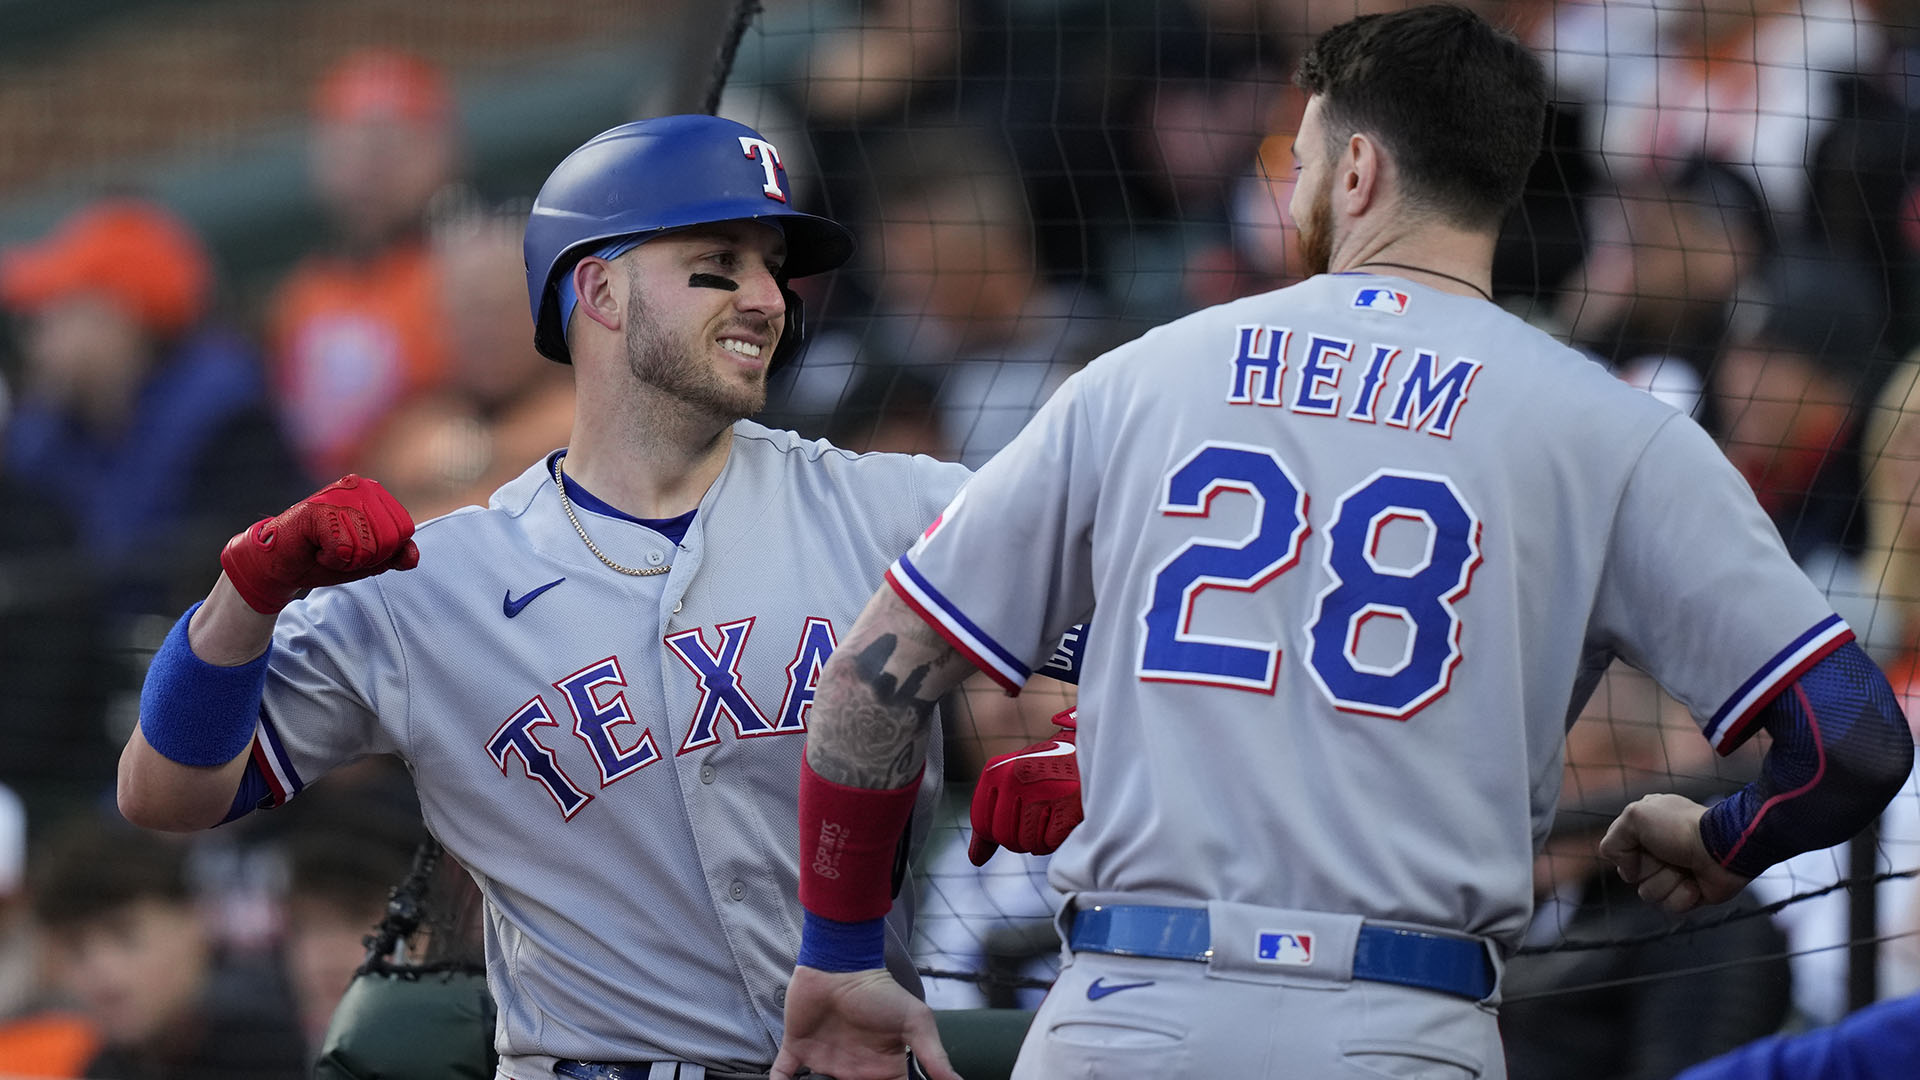 Texas Rangers ALDS Game 3 preview at Baltimore Orioles